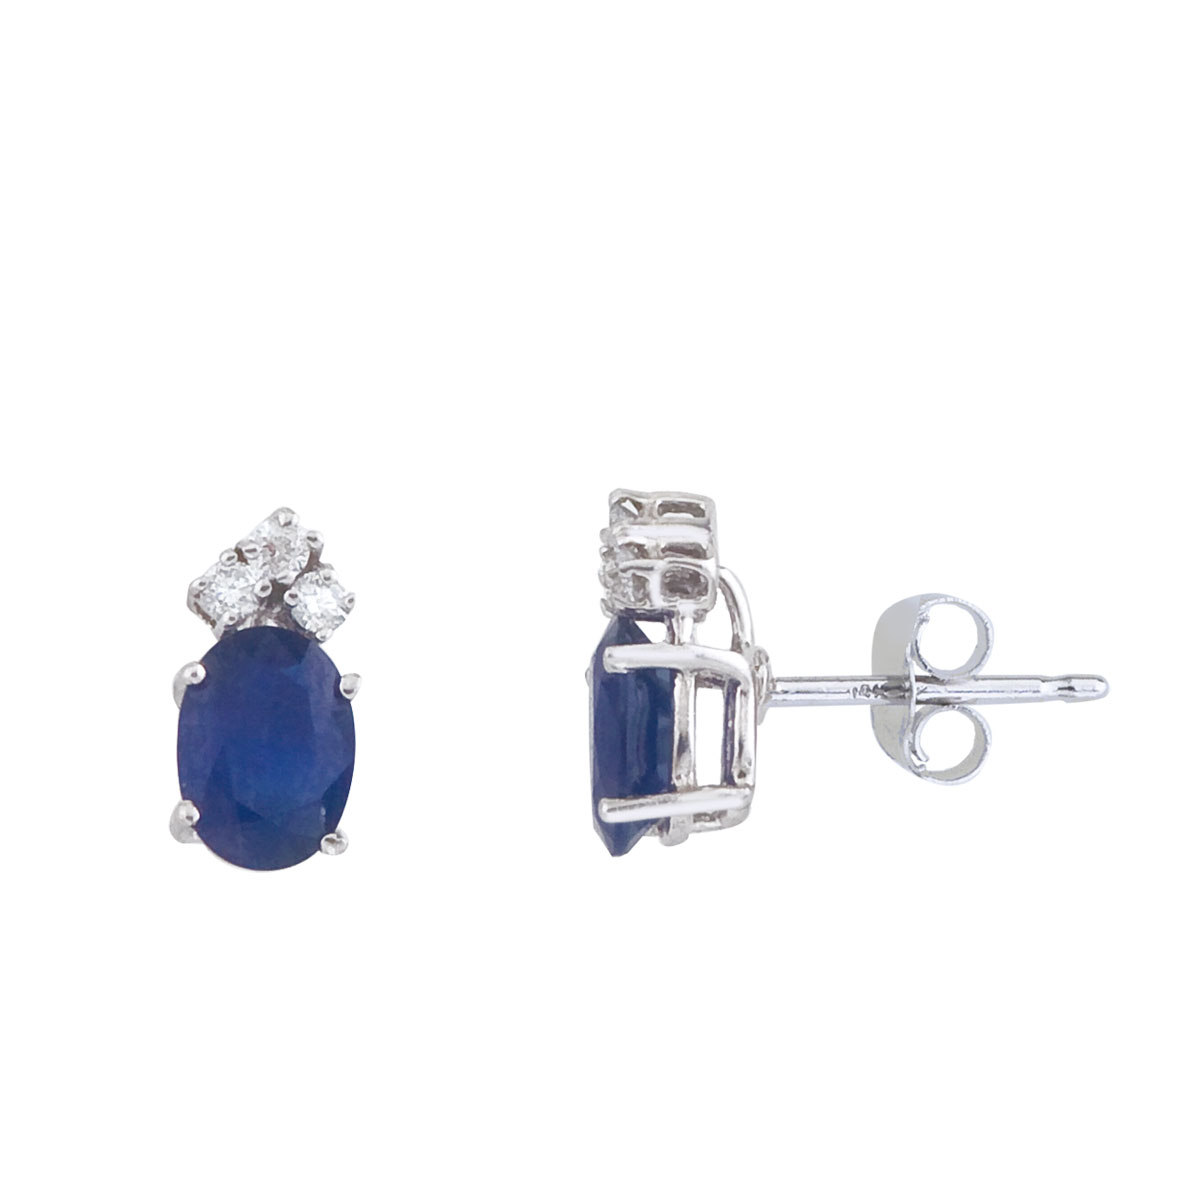 These 7x5 mm oval shaped sapphire earrings are set in beautiful 14k white gold and feature .12 to...